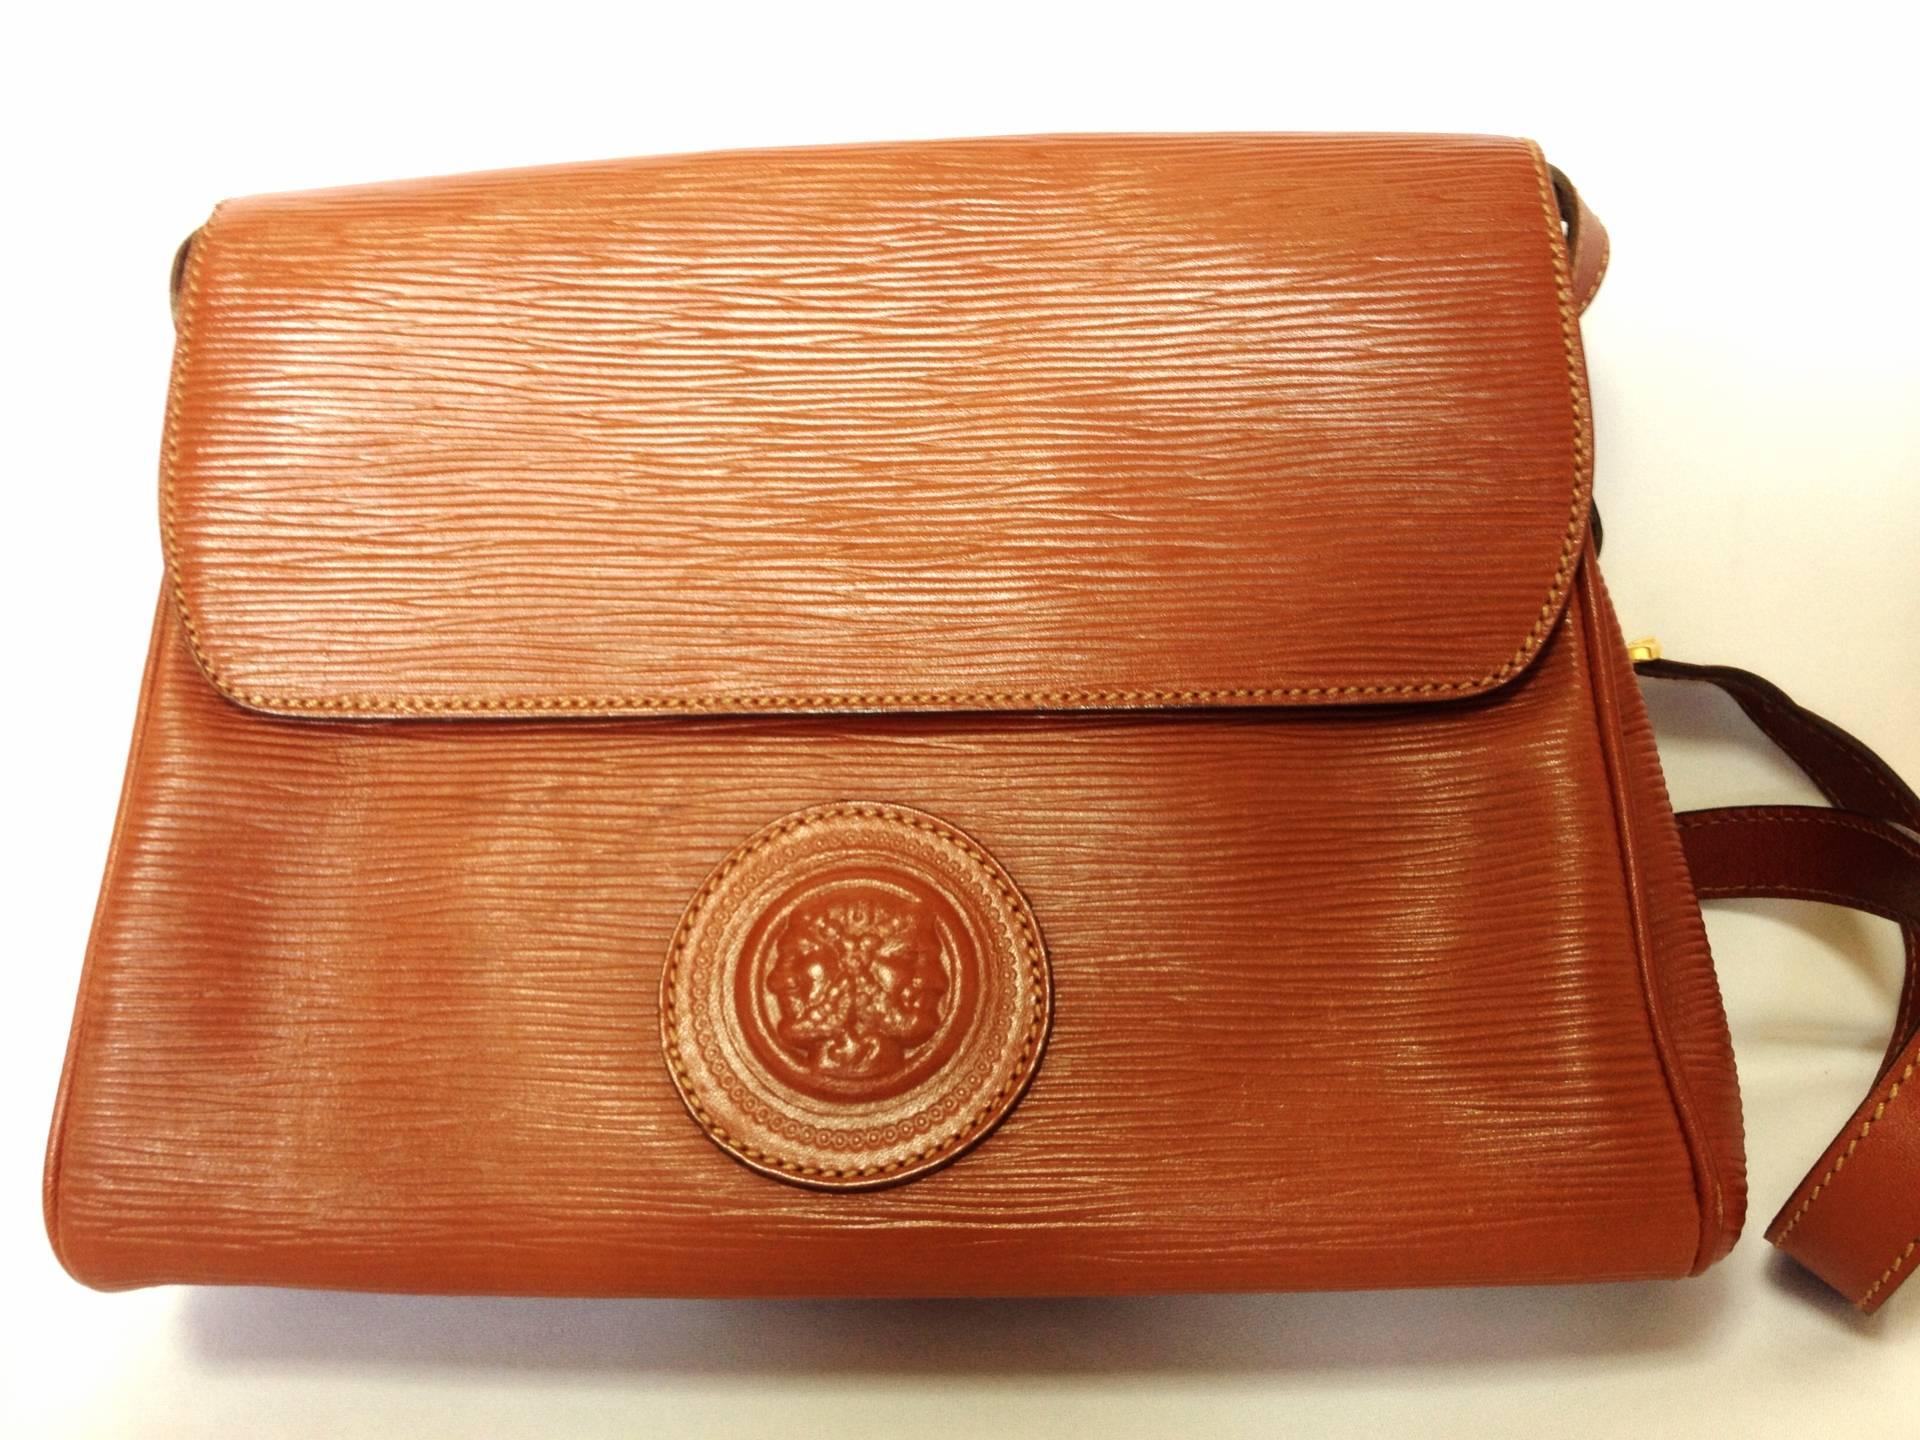 Vintage FENDI brown epi leather messenger bag, shoulder purse with iconic logo embossed motif at front. Unisex. Rare bag.

If you are a FENDI vintage collector and lover, then this one will be your must-have piece.

This is a vintage